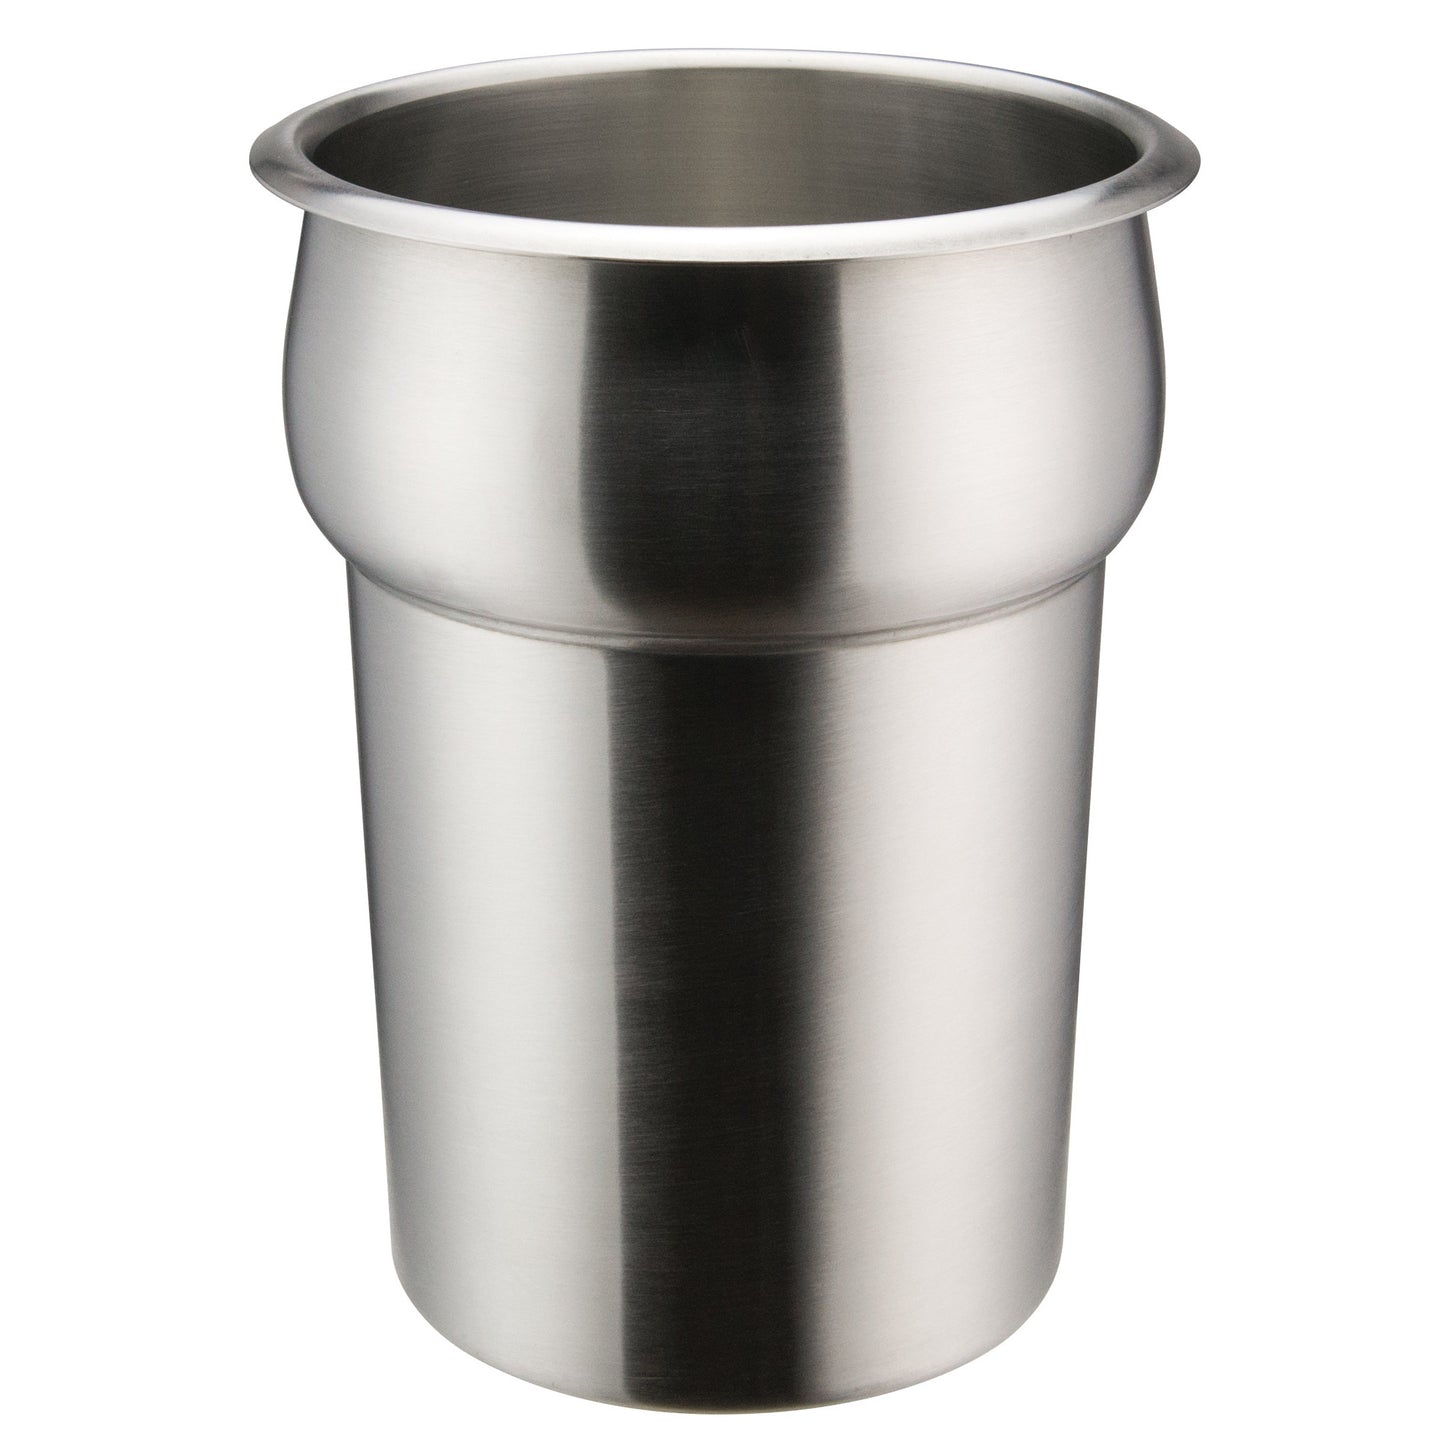 INSN-2.5 - Winco Prime Stainless Steel Inset - 2.5 Quart